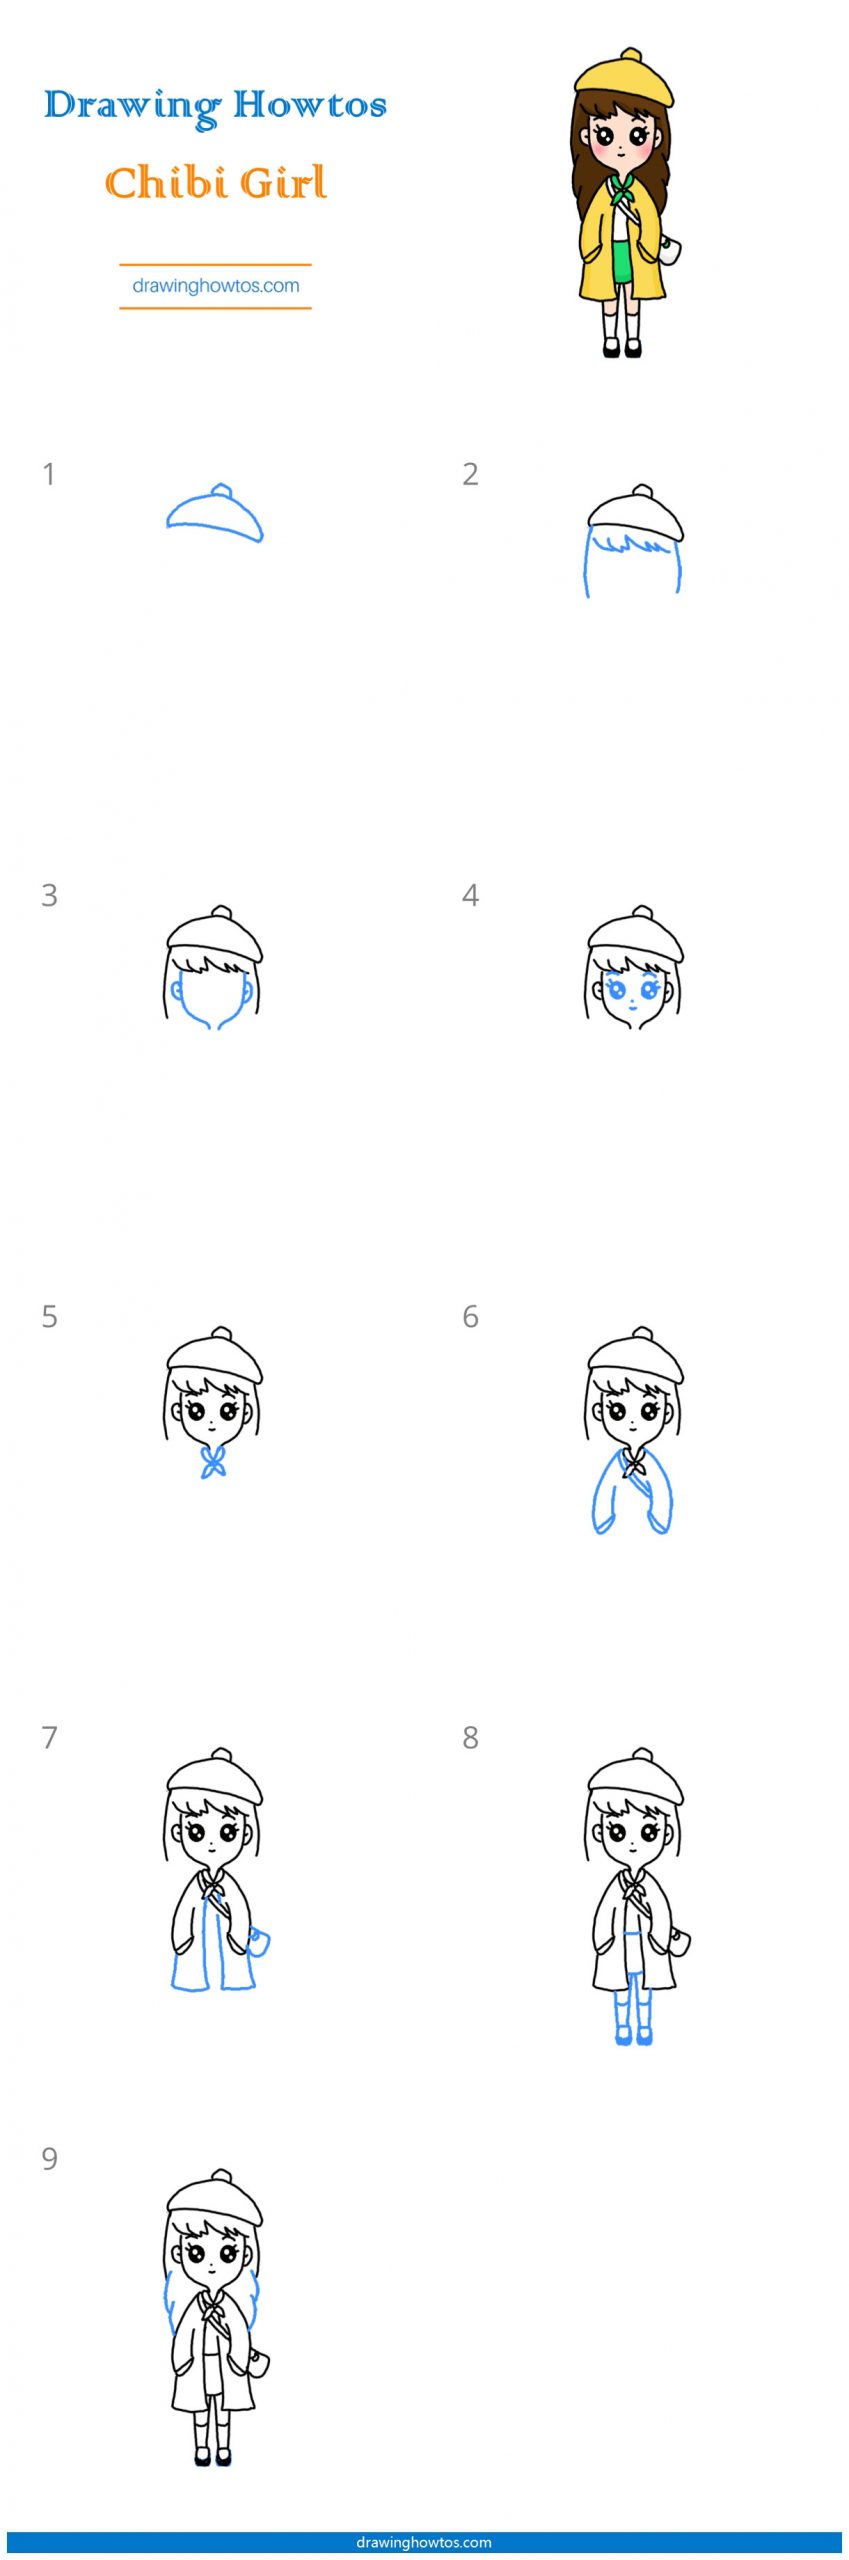 How to Draw a Chibi Girl Step by Step